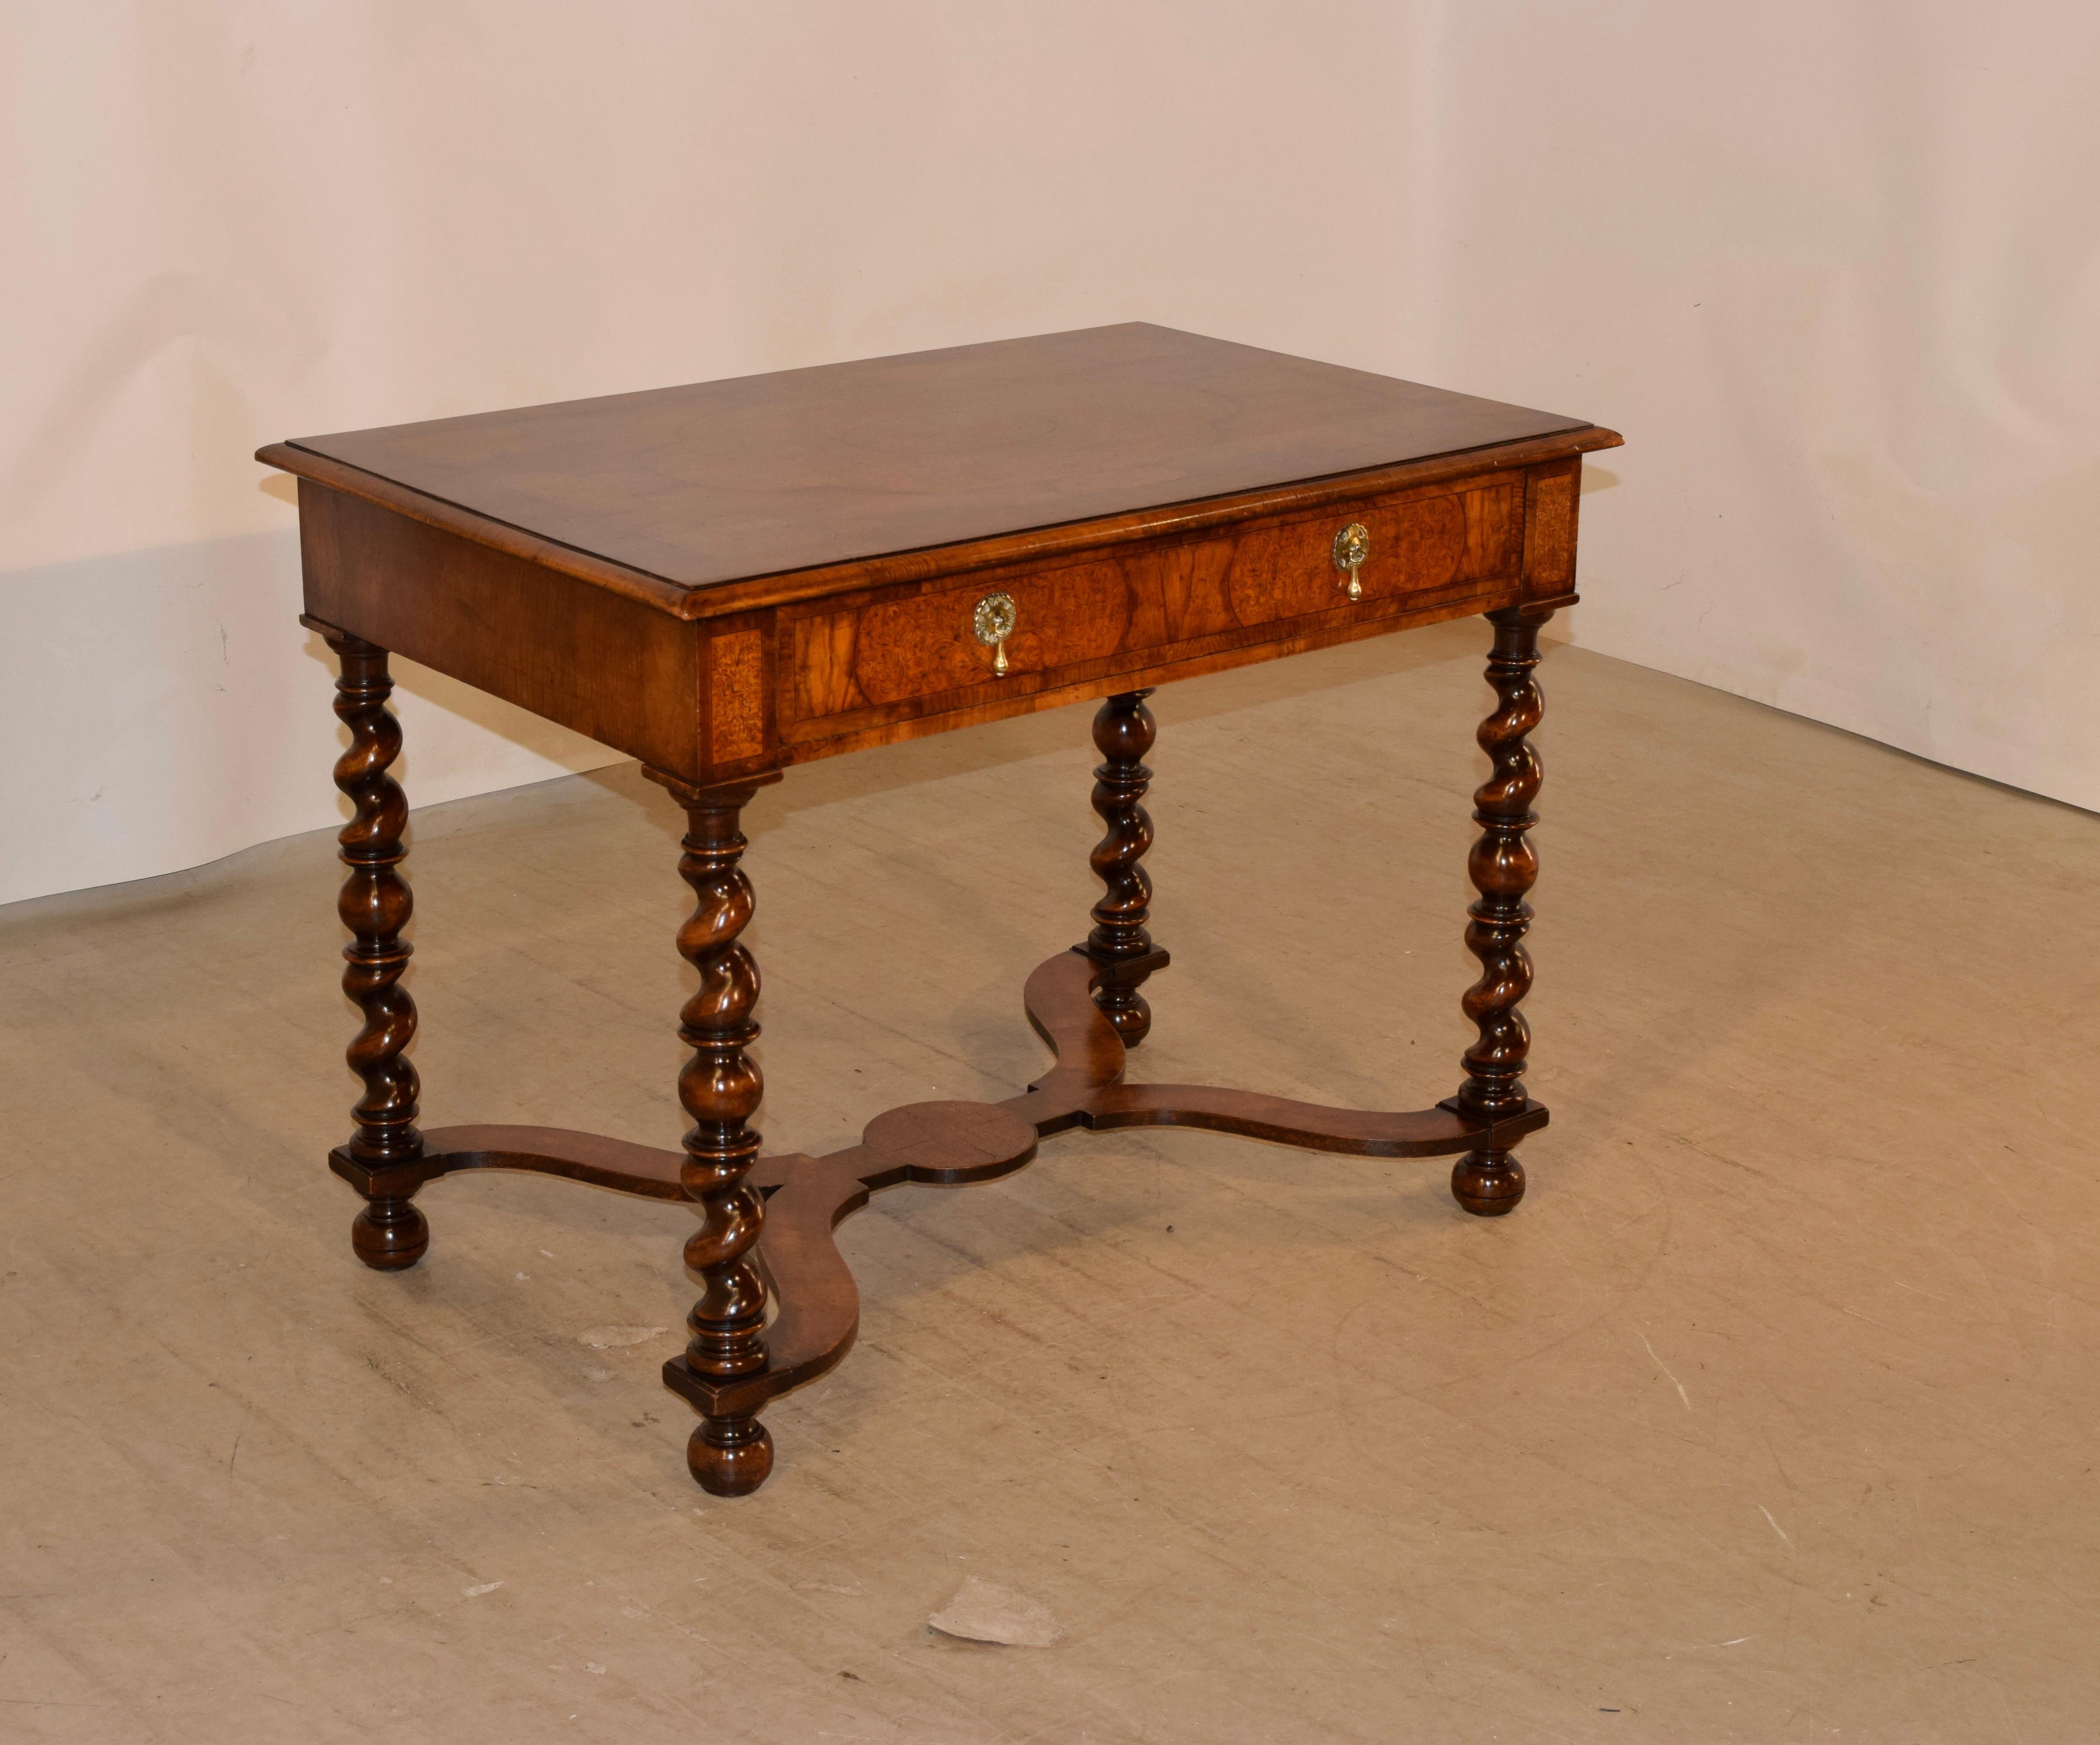 19th century William and Mary style burl walnut table with exquisite marquetry detailing. The top is banded and has a beveled edge surrounding a profuse floral marquetry pen and ink work detailed top, following down to a single drawer in the front